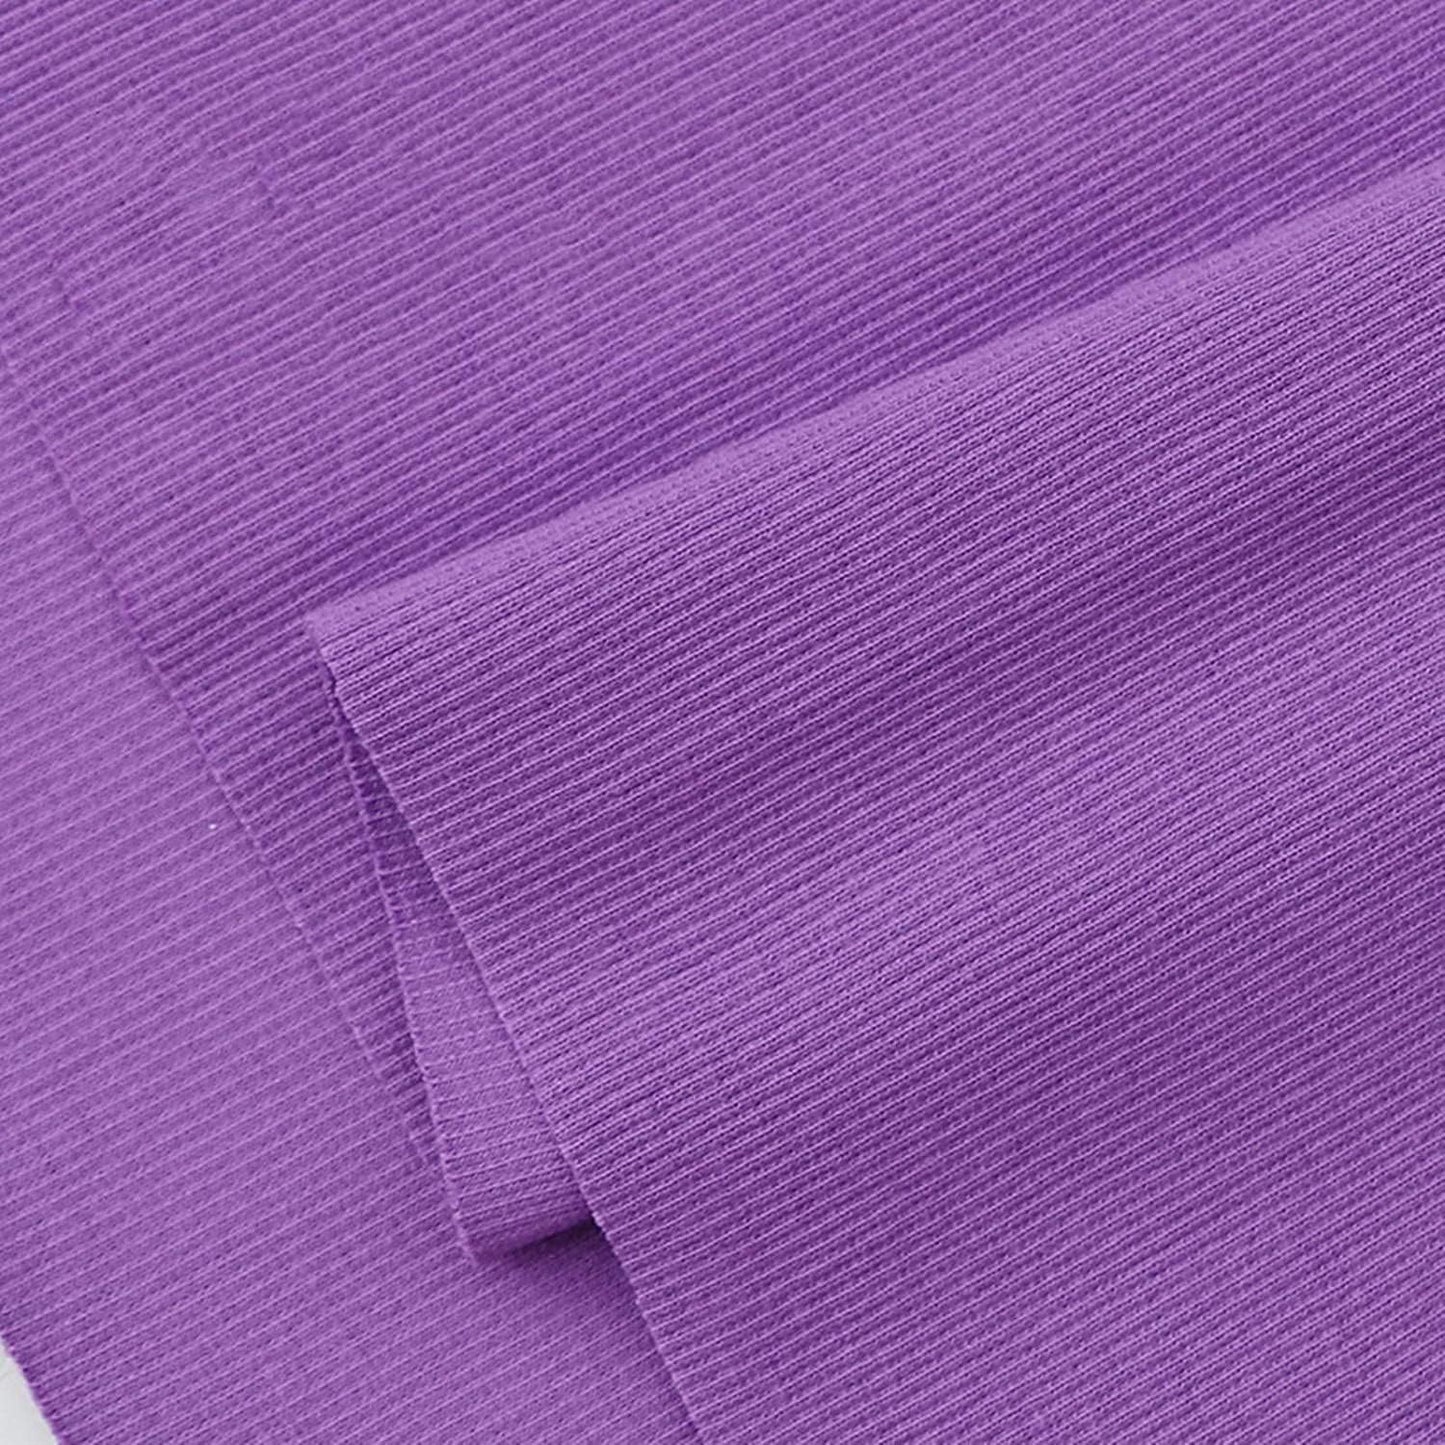 TinaKim Ribbed Ribbing Cotton Stretch Fabric For Waistbands Collar Cuffs Trim Material Clothes Sewing